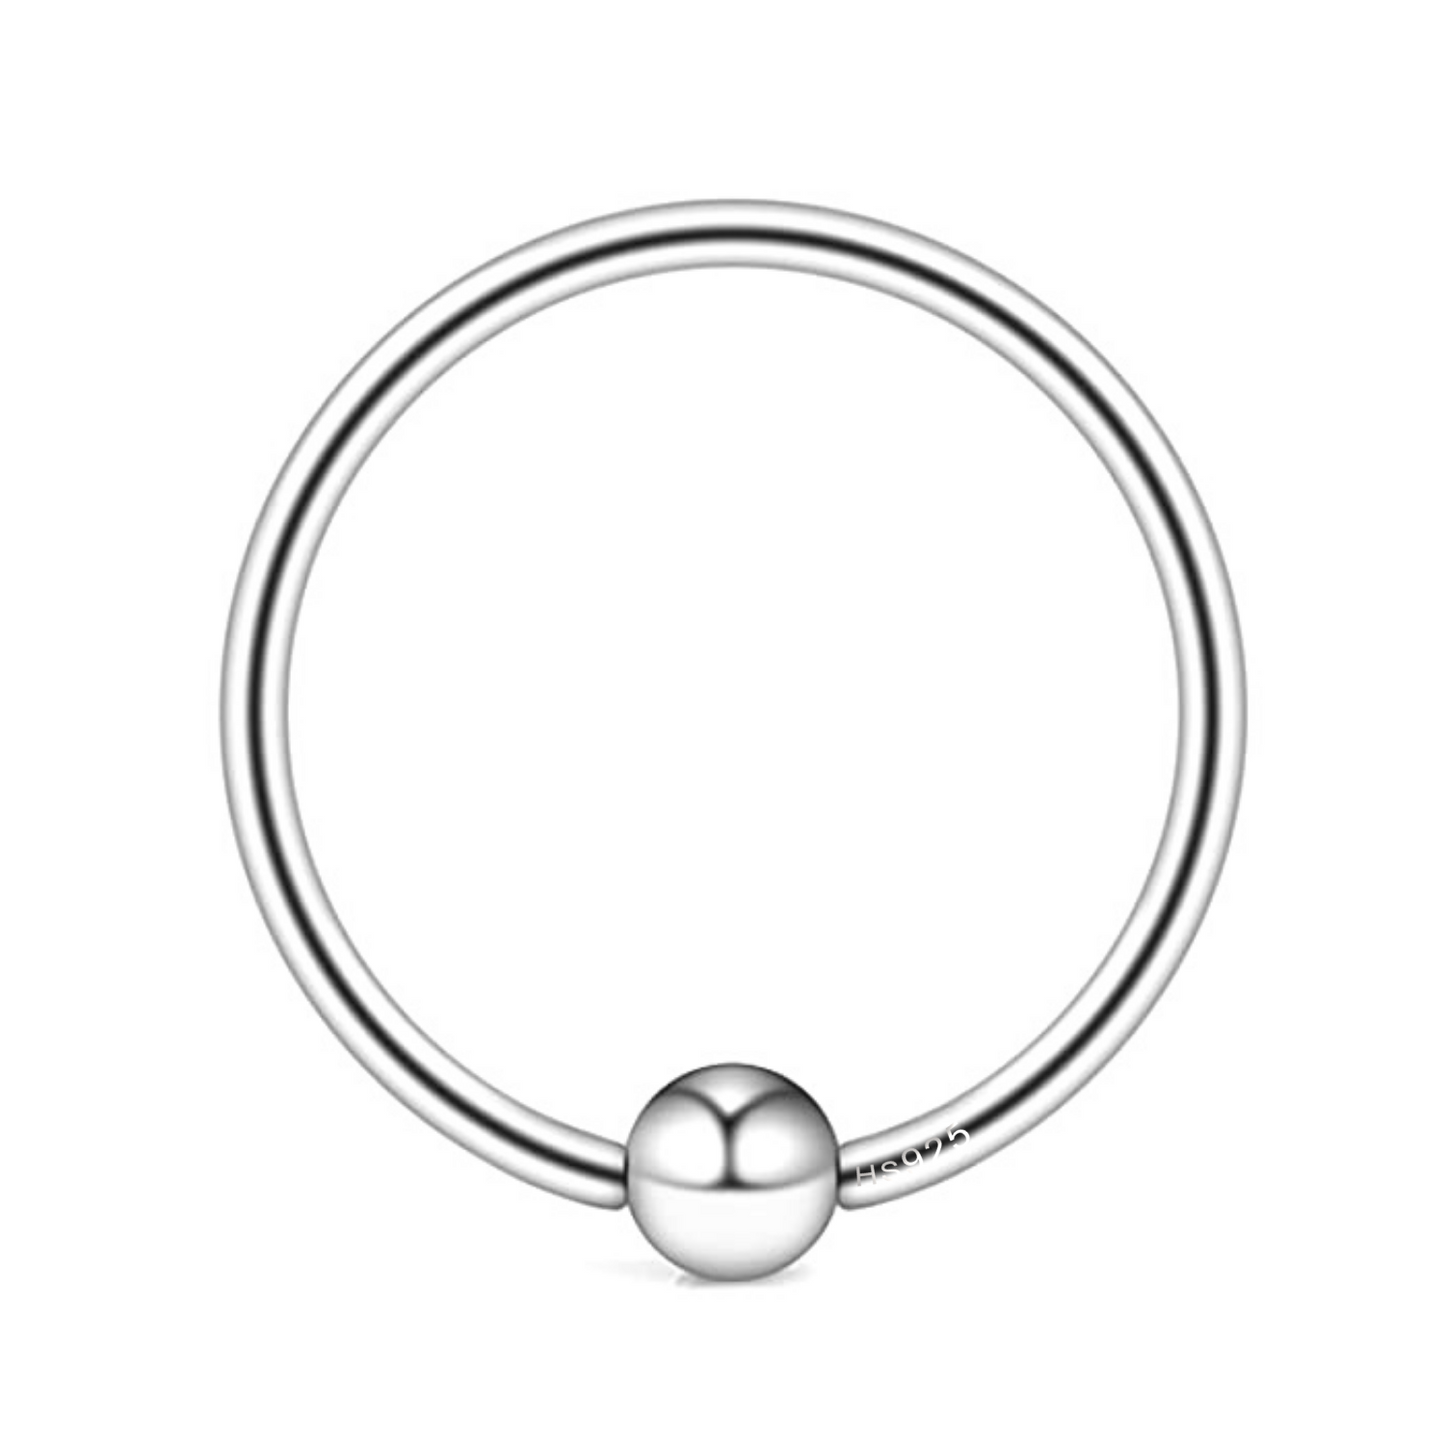 Nose Ring Ball in 92.5 Sterling Silver - Elegant Septum Ring / Nose Pin / Silver Nath- No piercing required